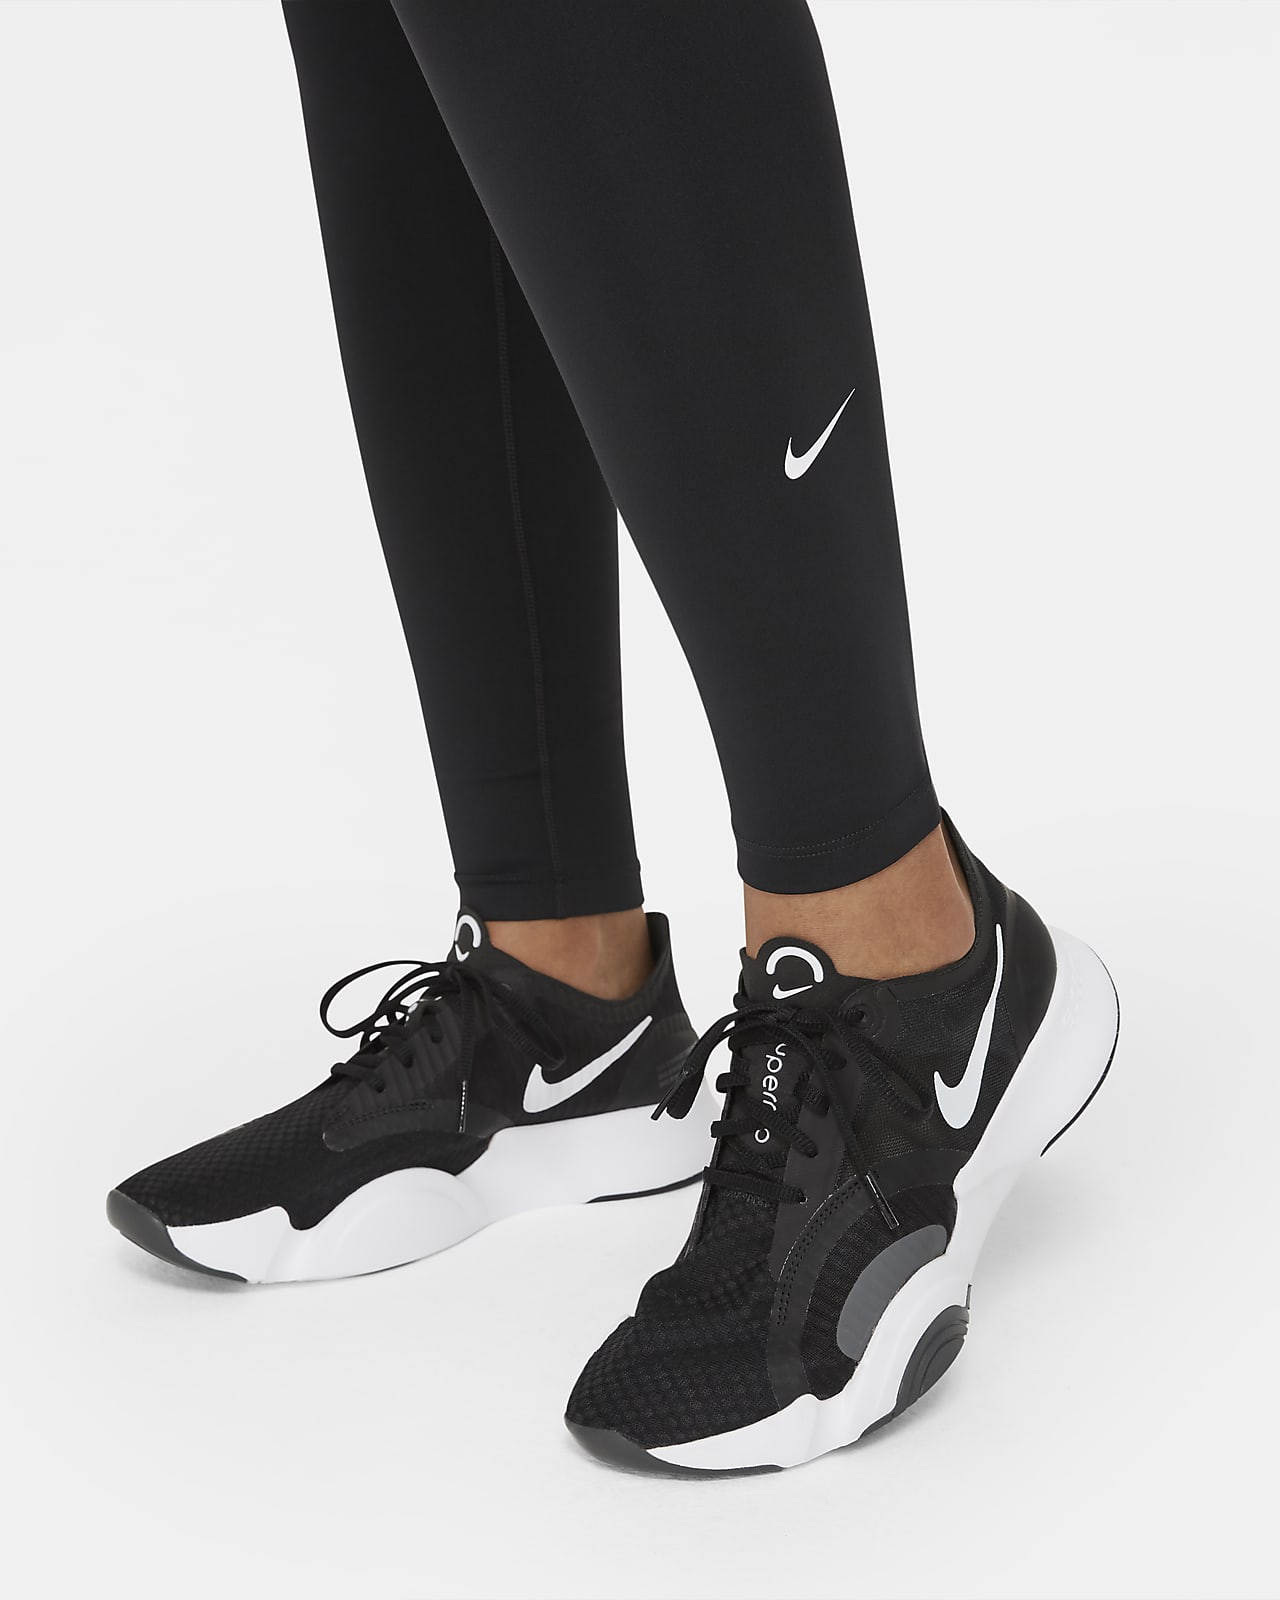 Nike Women's One Luxe Mid Rise 7/8 Laced Legging (Black, X-Large